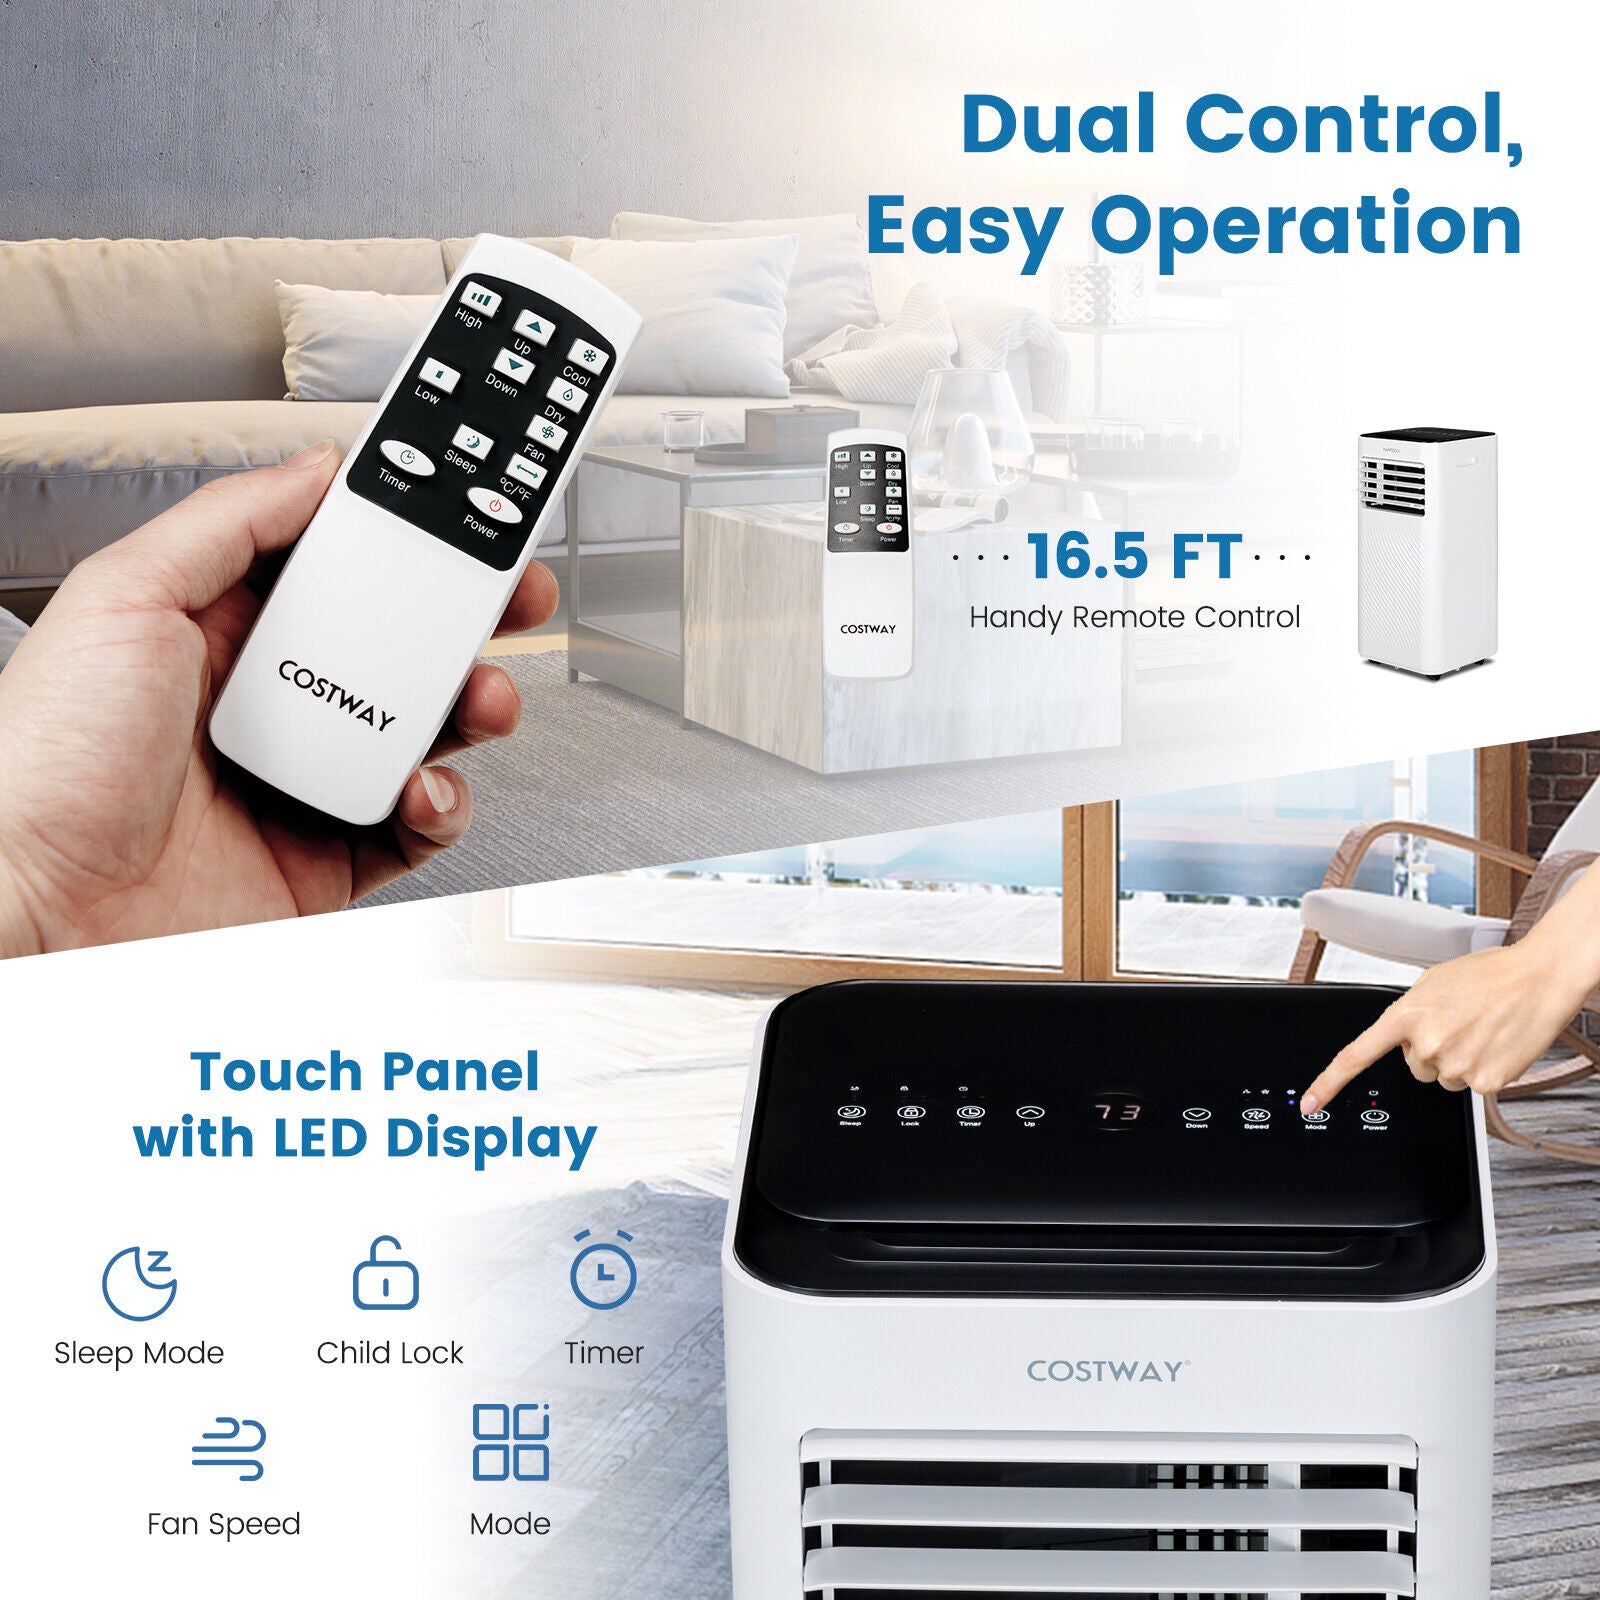  Dual Control, Easy Operation: This portable AC is equipped with a handy remote control (max control distance: 16.4 ft) and a touch panel with an LED display. There are 2 ways to drain the water: manual drainage and continuous drainage. Moreover, this portable AC is built with an auto defrost function to ensure smooth operation.